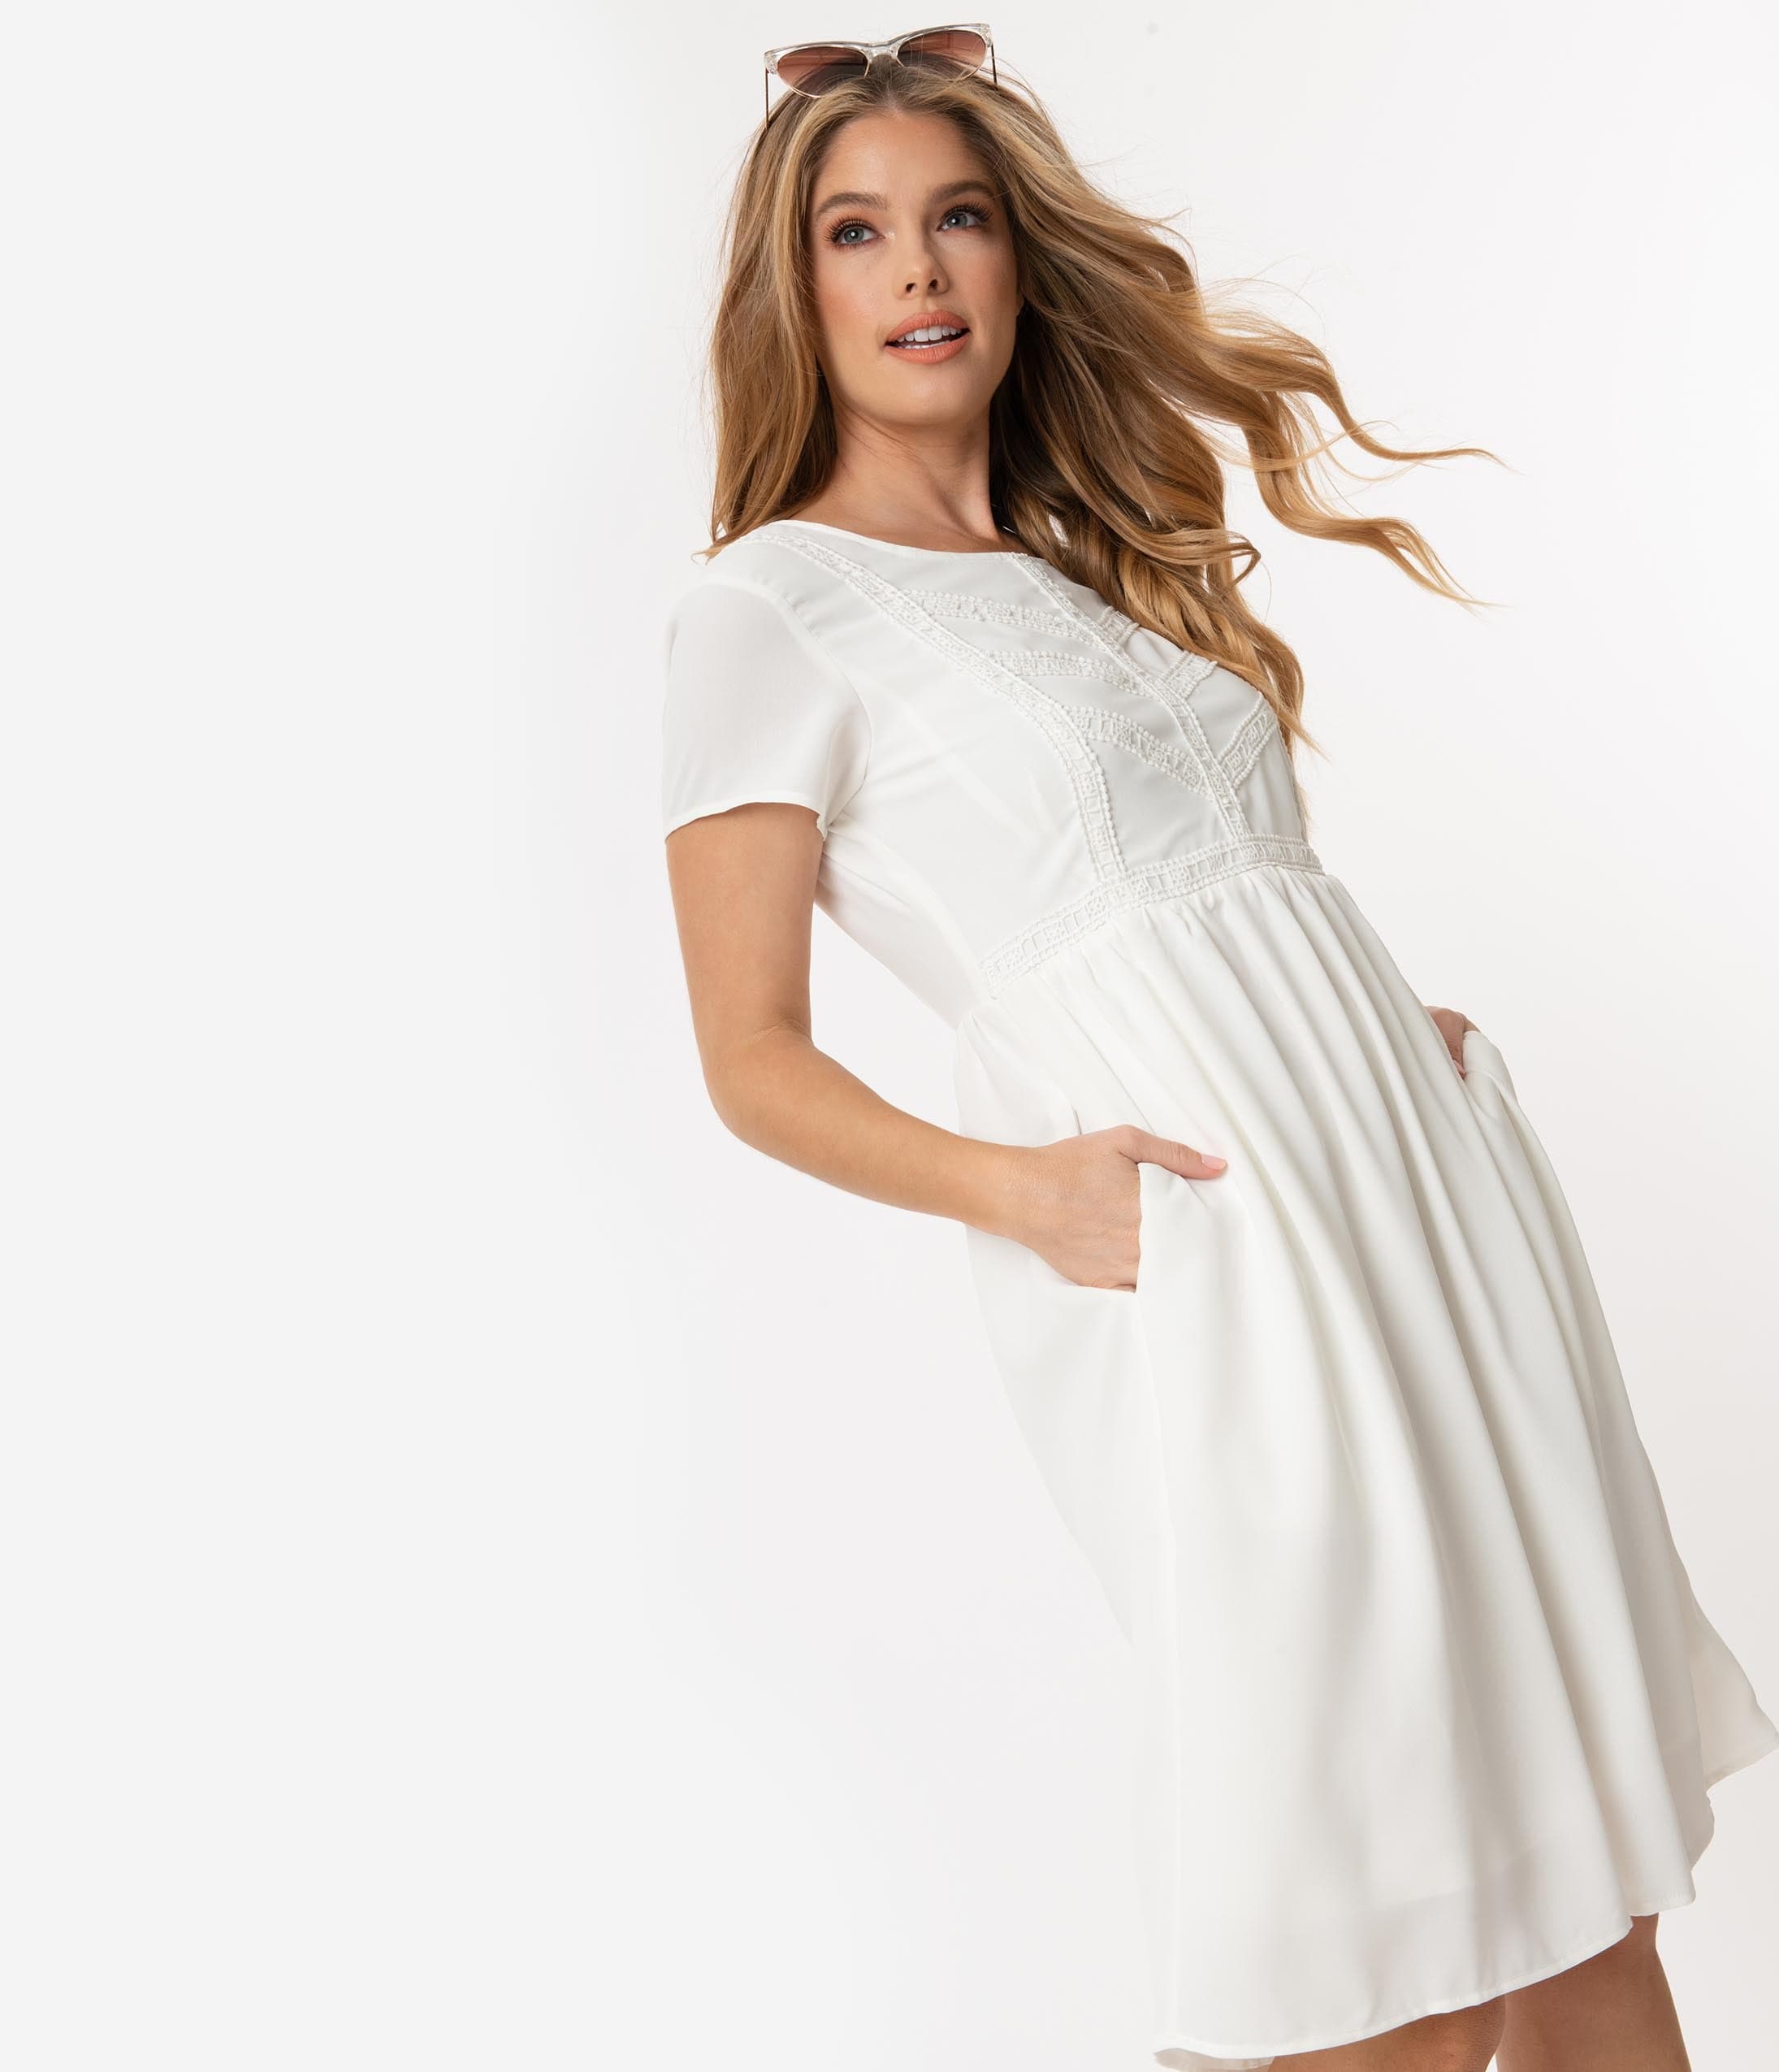 lightweight summer dresses with sleeves